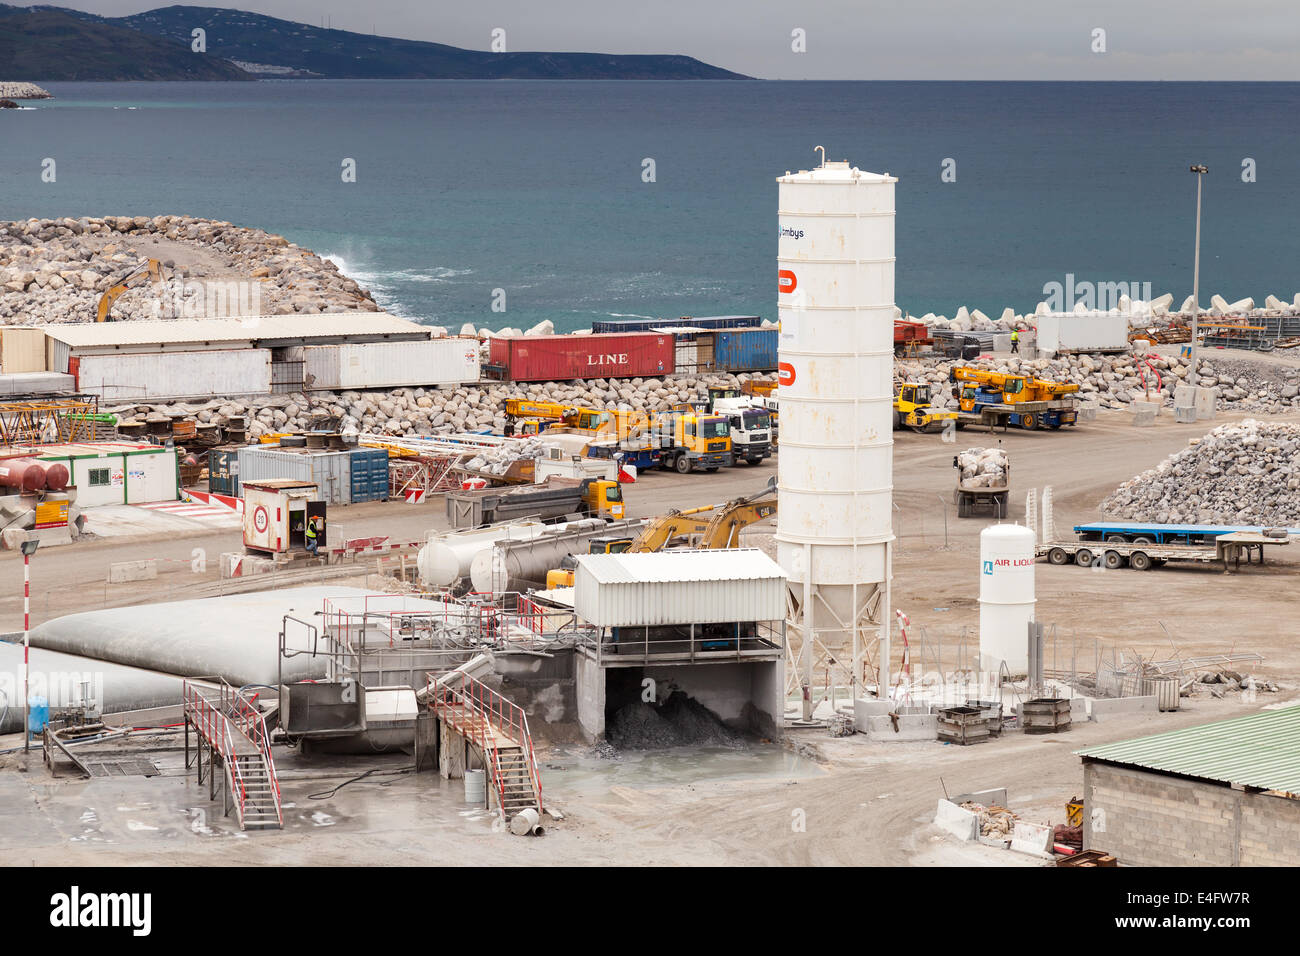 TANGER, MOROCCO - MARCH 28, 2014: New terminals area under construction, Port Tanger-Med 2. It will be the biggest port in Afric Stock Photo